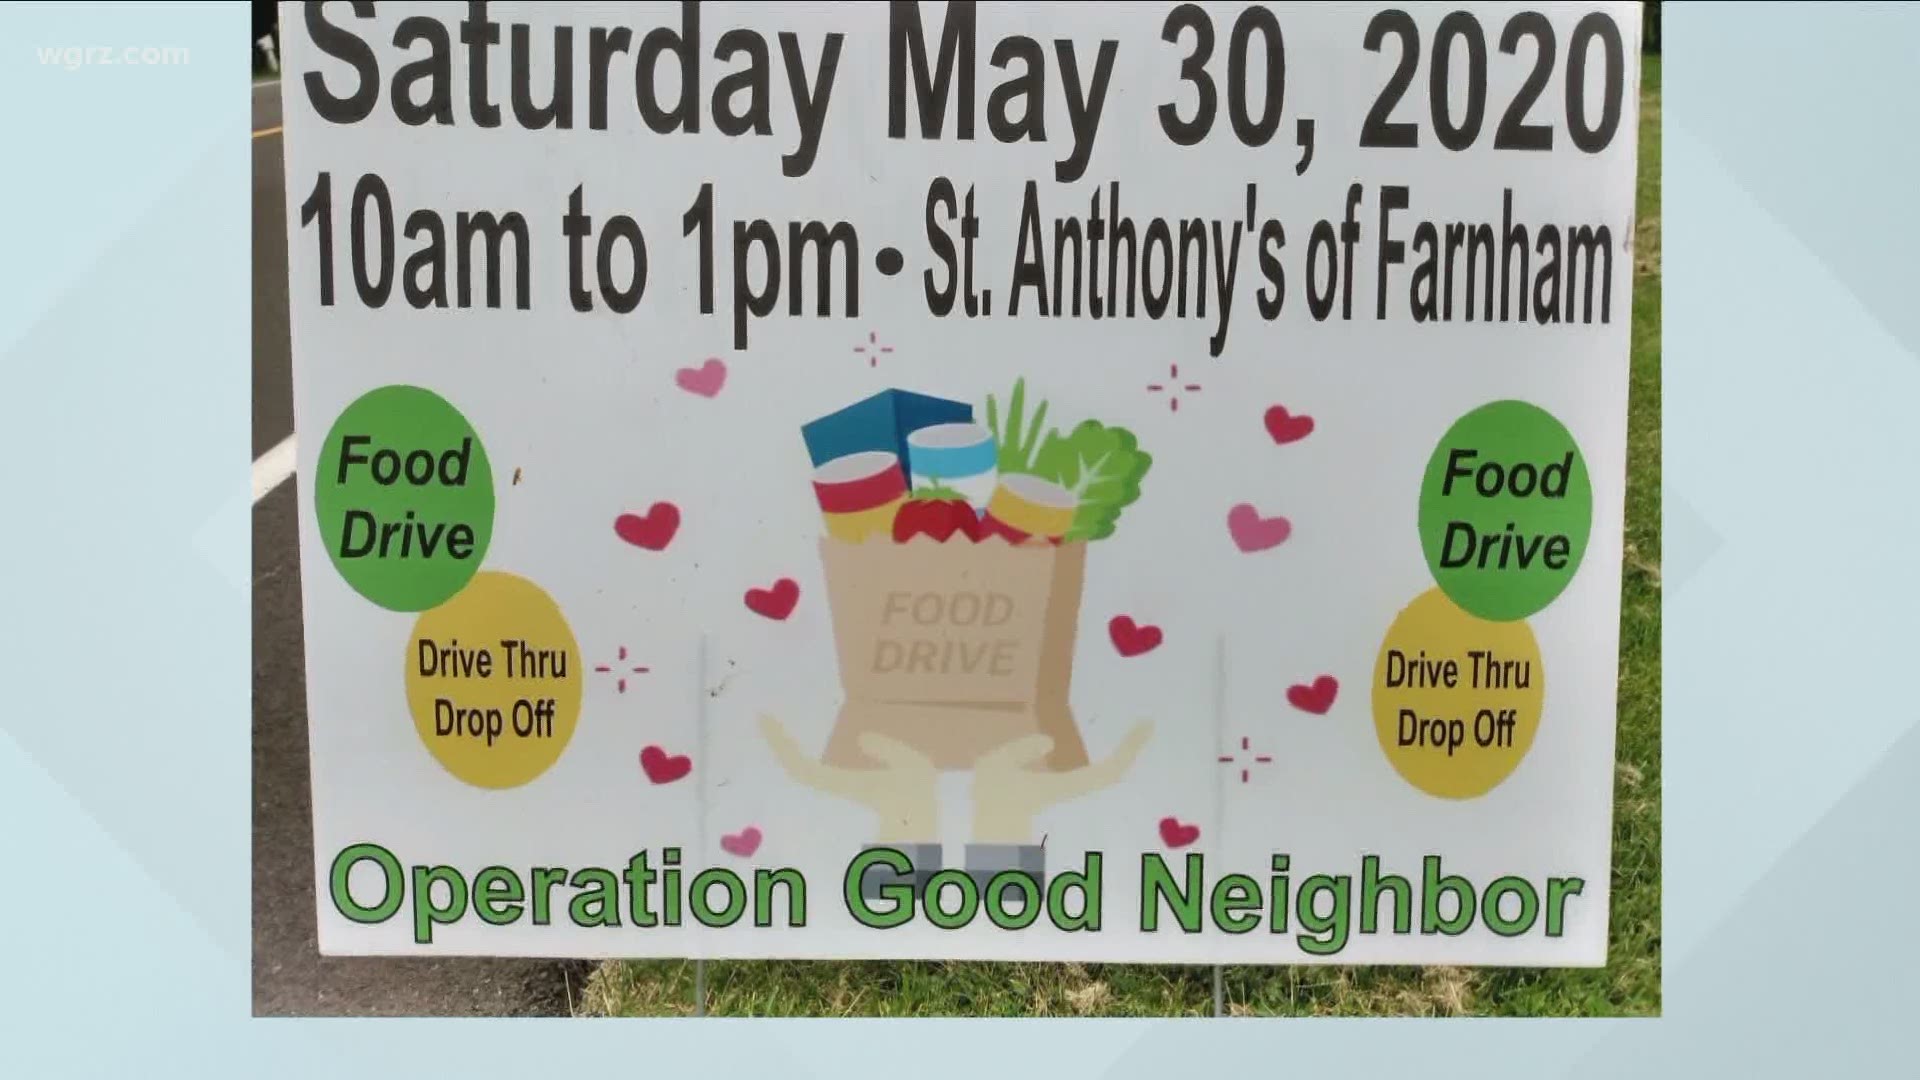 Parishoners will collect food and personal care items on Saturday outside St. Anthony's Church